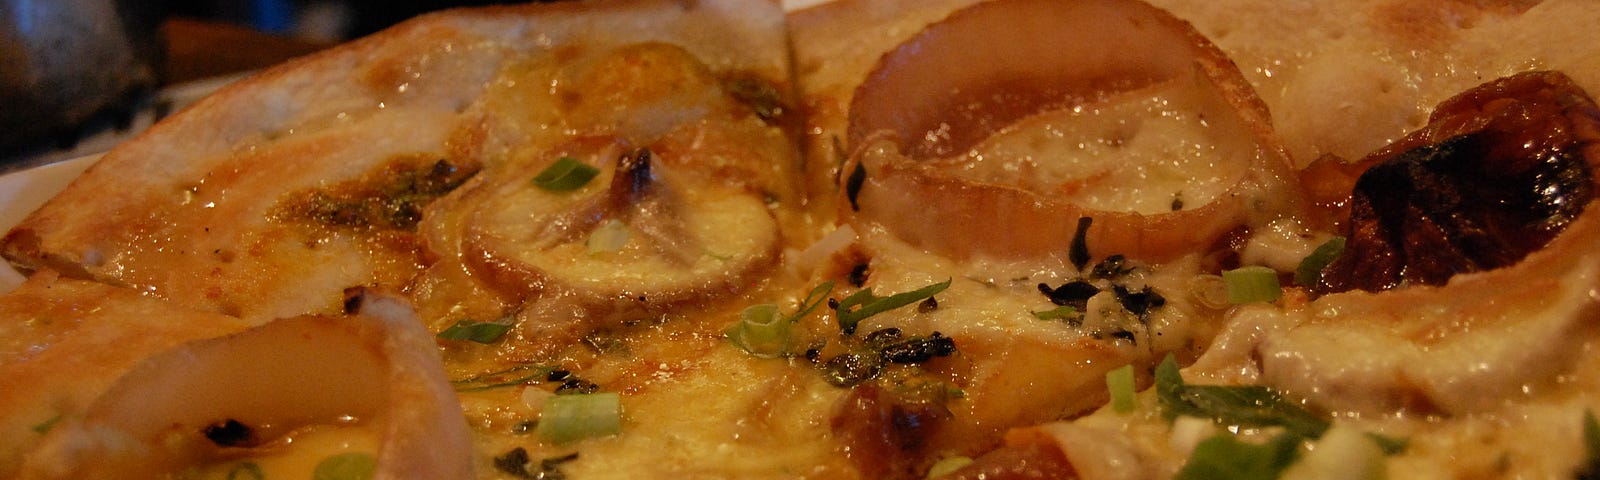 Delicious looking onion pizza